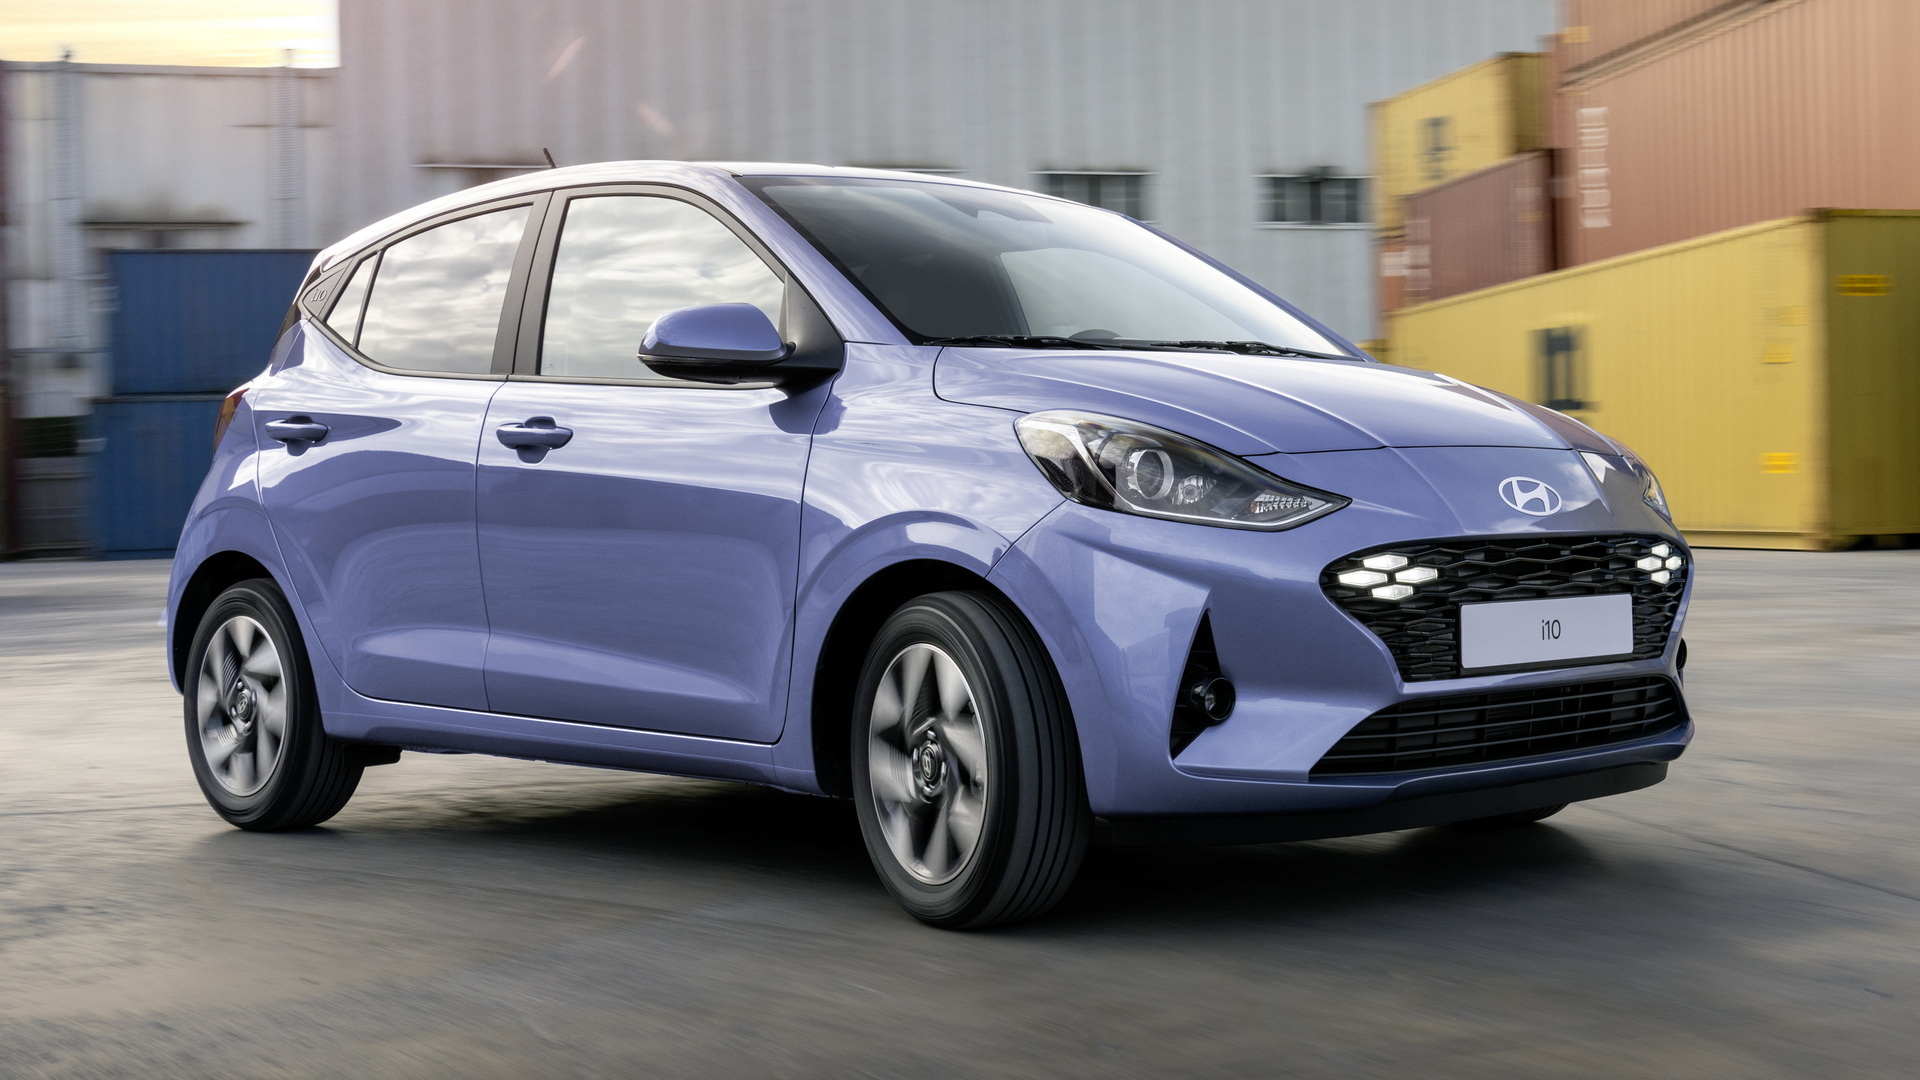 2023 Hyundai i10 Breaks Cover With Mild Updates, Retains Sporty N Line Trim